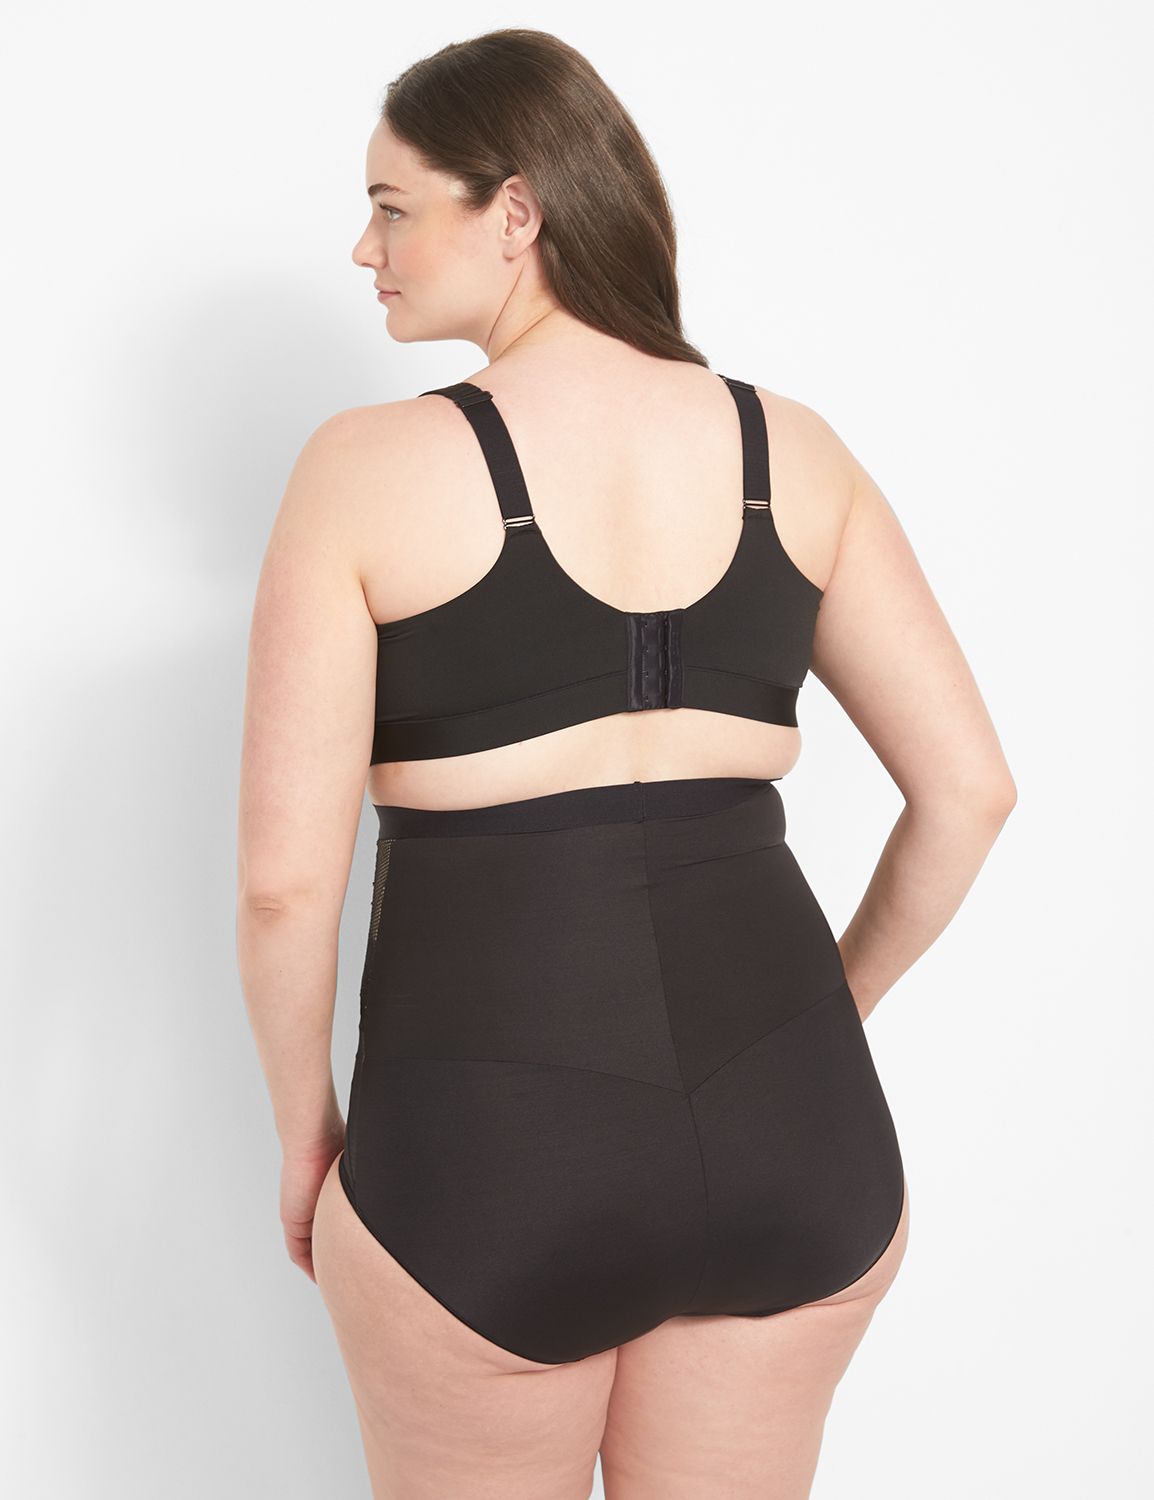 Skjult navn ovn Plus Size Shapewear & Body Shapers | Cacique